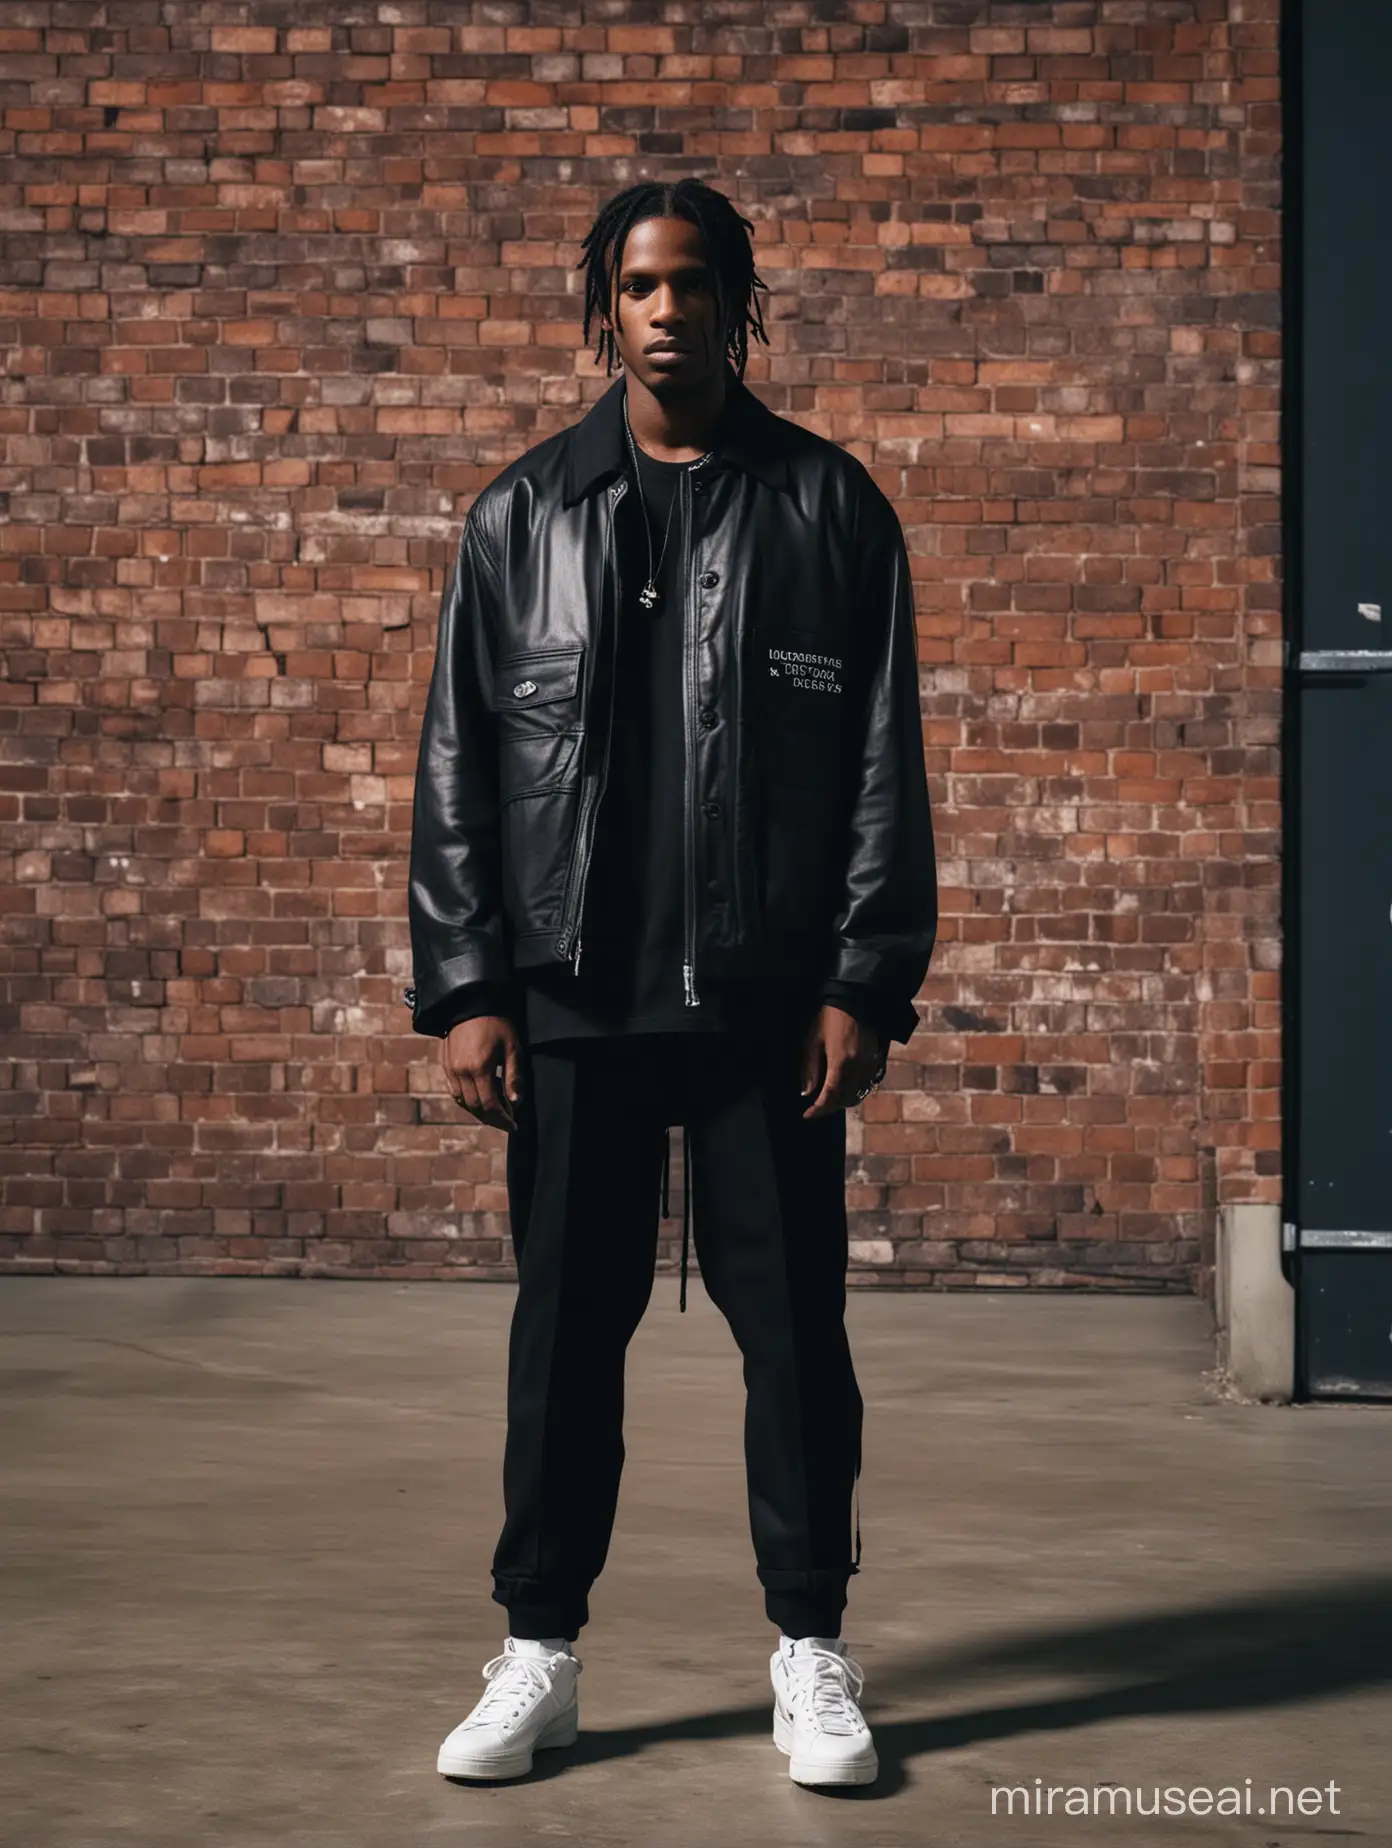 A$AP Rocky x Raf Simons: Against the backdrop of an industrial warehouse, A$AP Rocky exudes effortless cool in Raf Simons' avant-garde streetwear. Moody lighting and bold architecture set the stage for Rocky's edgy style and fearless attitude.